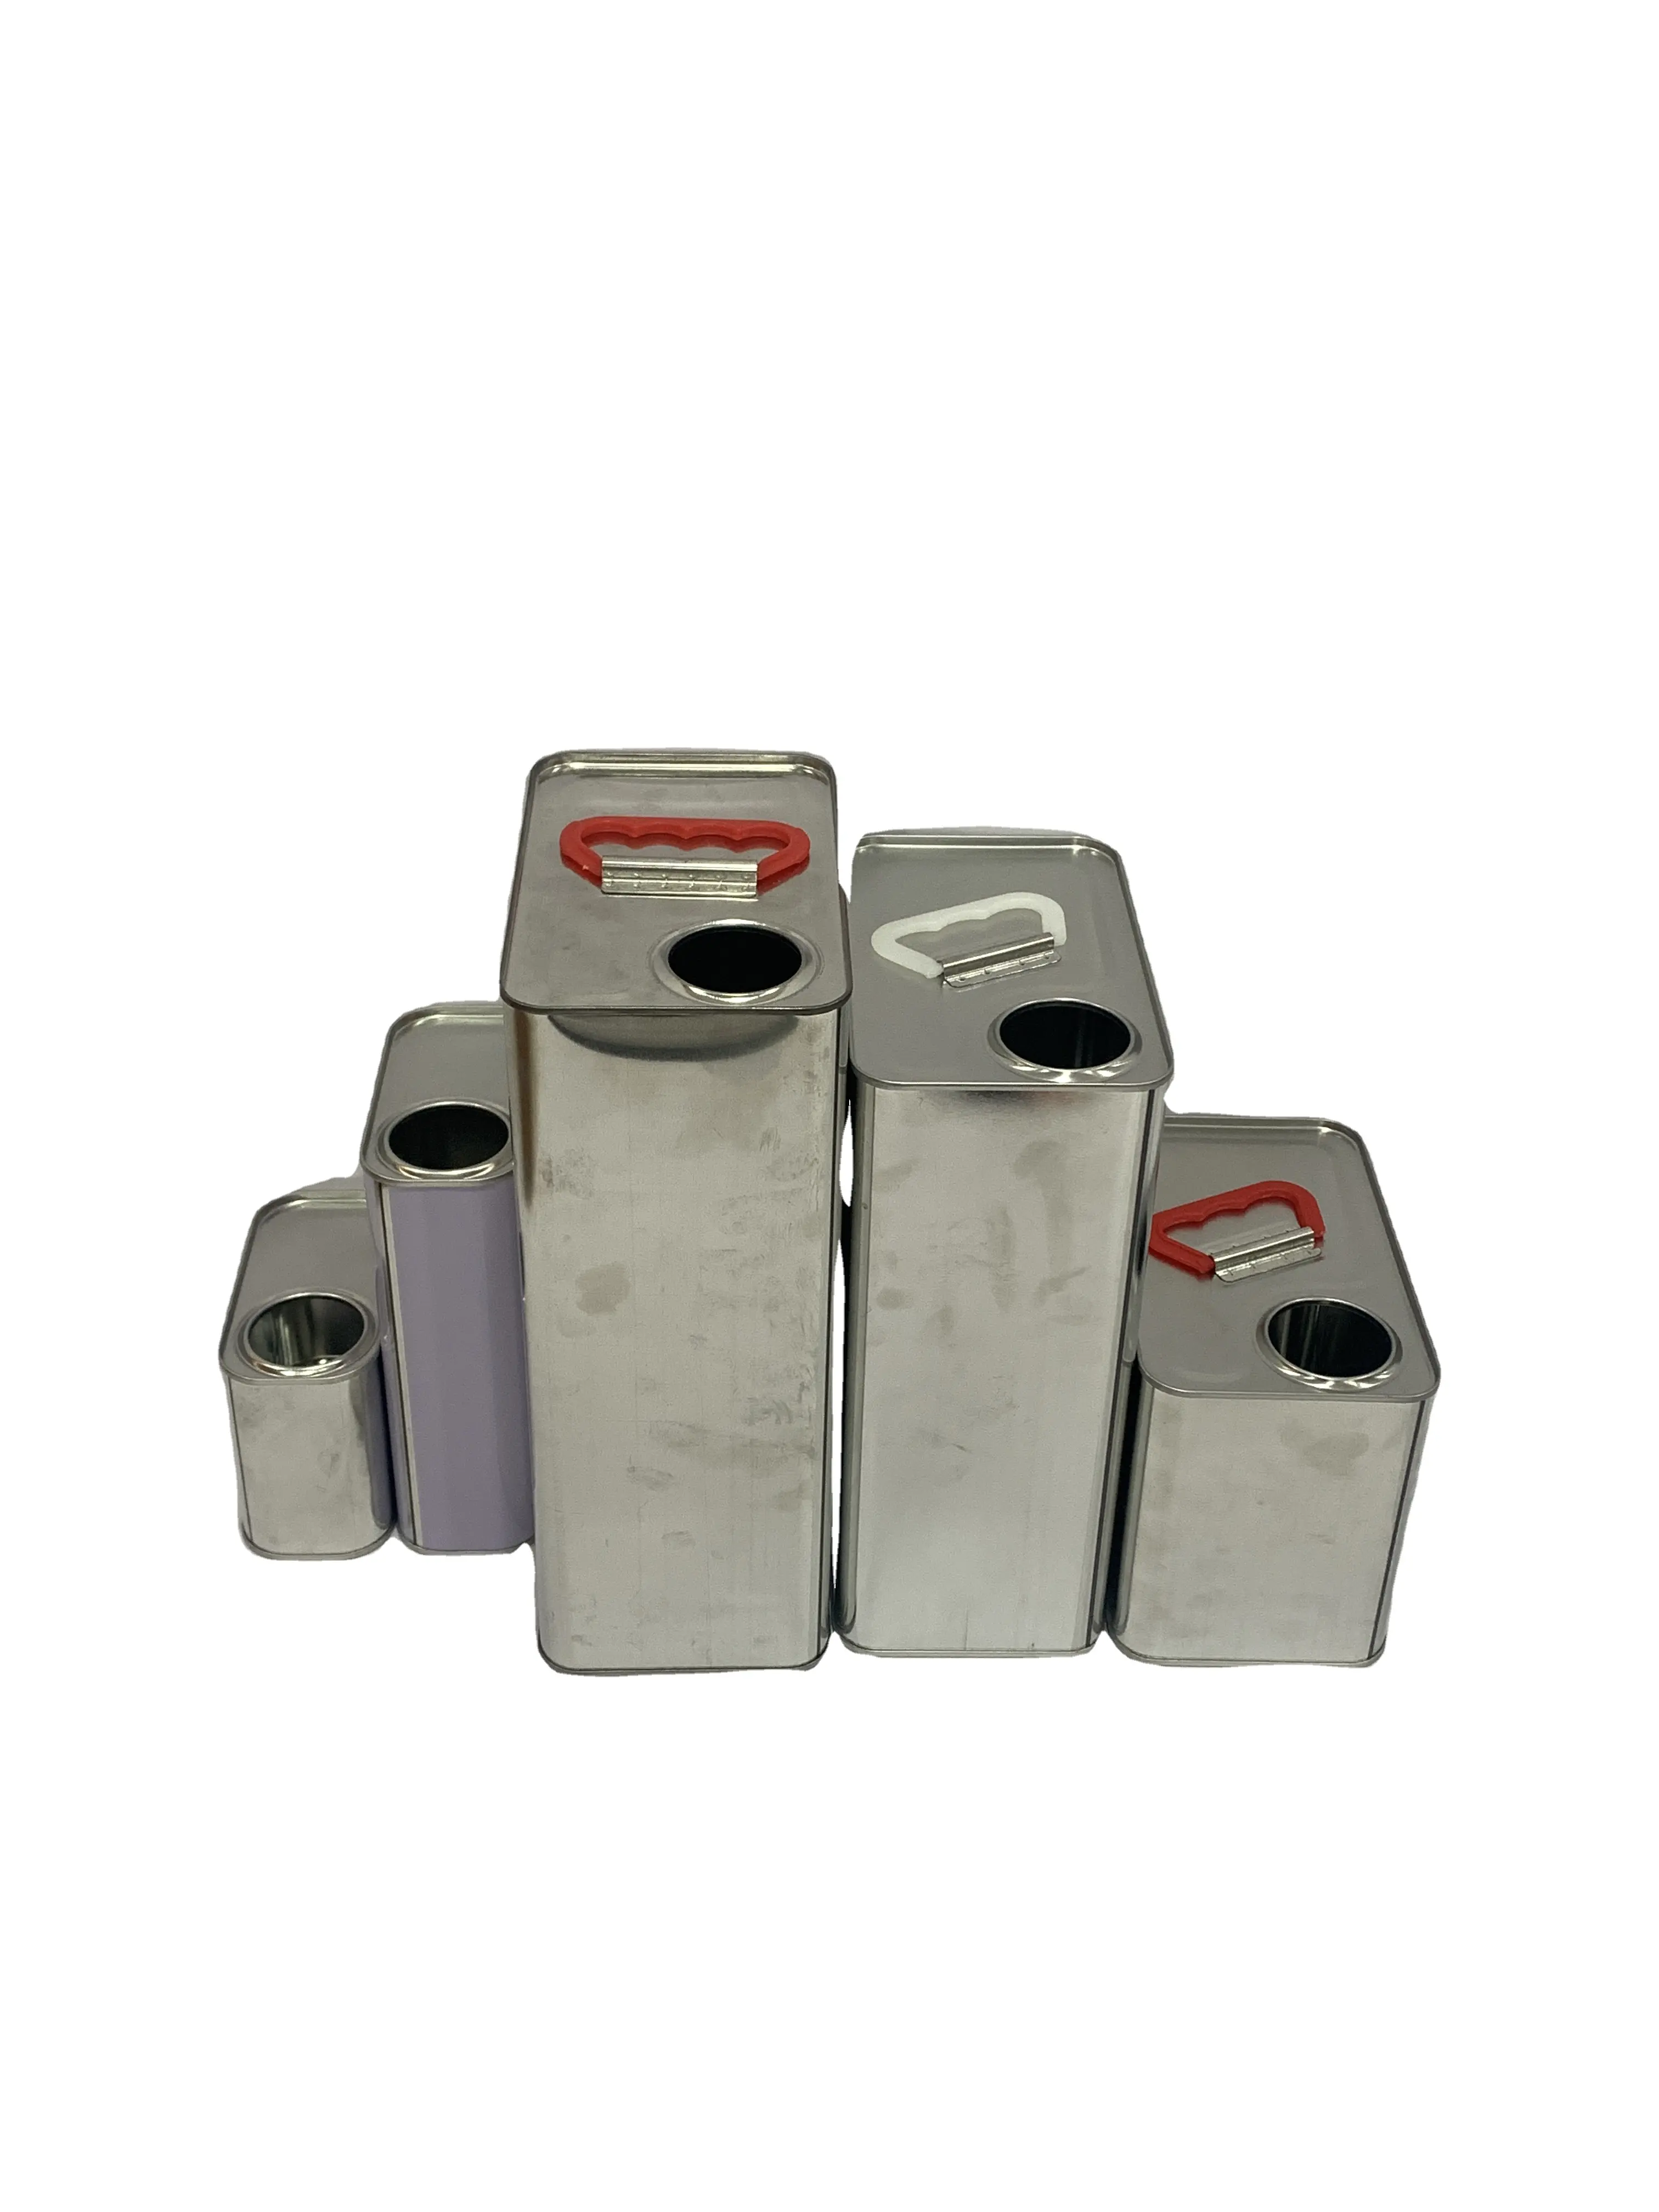 Custom Packaging Large Capacity Rectangular Metal Cans 500mL-5L Tin Can Vessels for Chemical Packaging 1L-5L Sizes Customizable